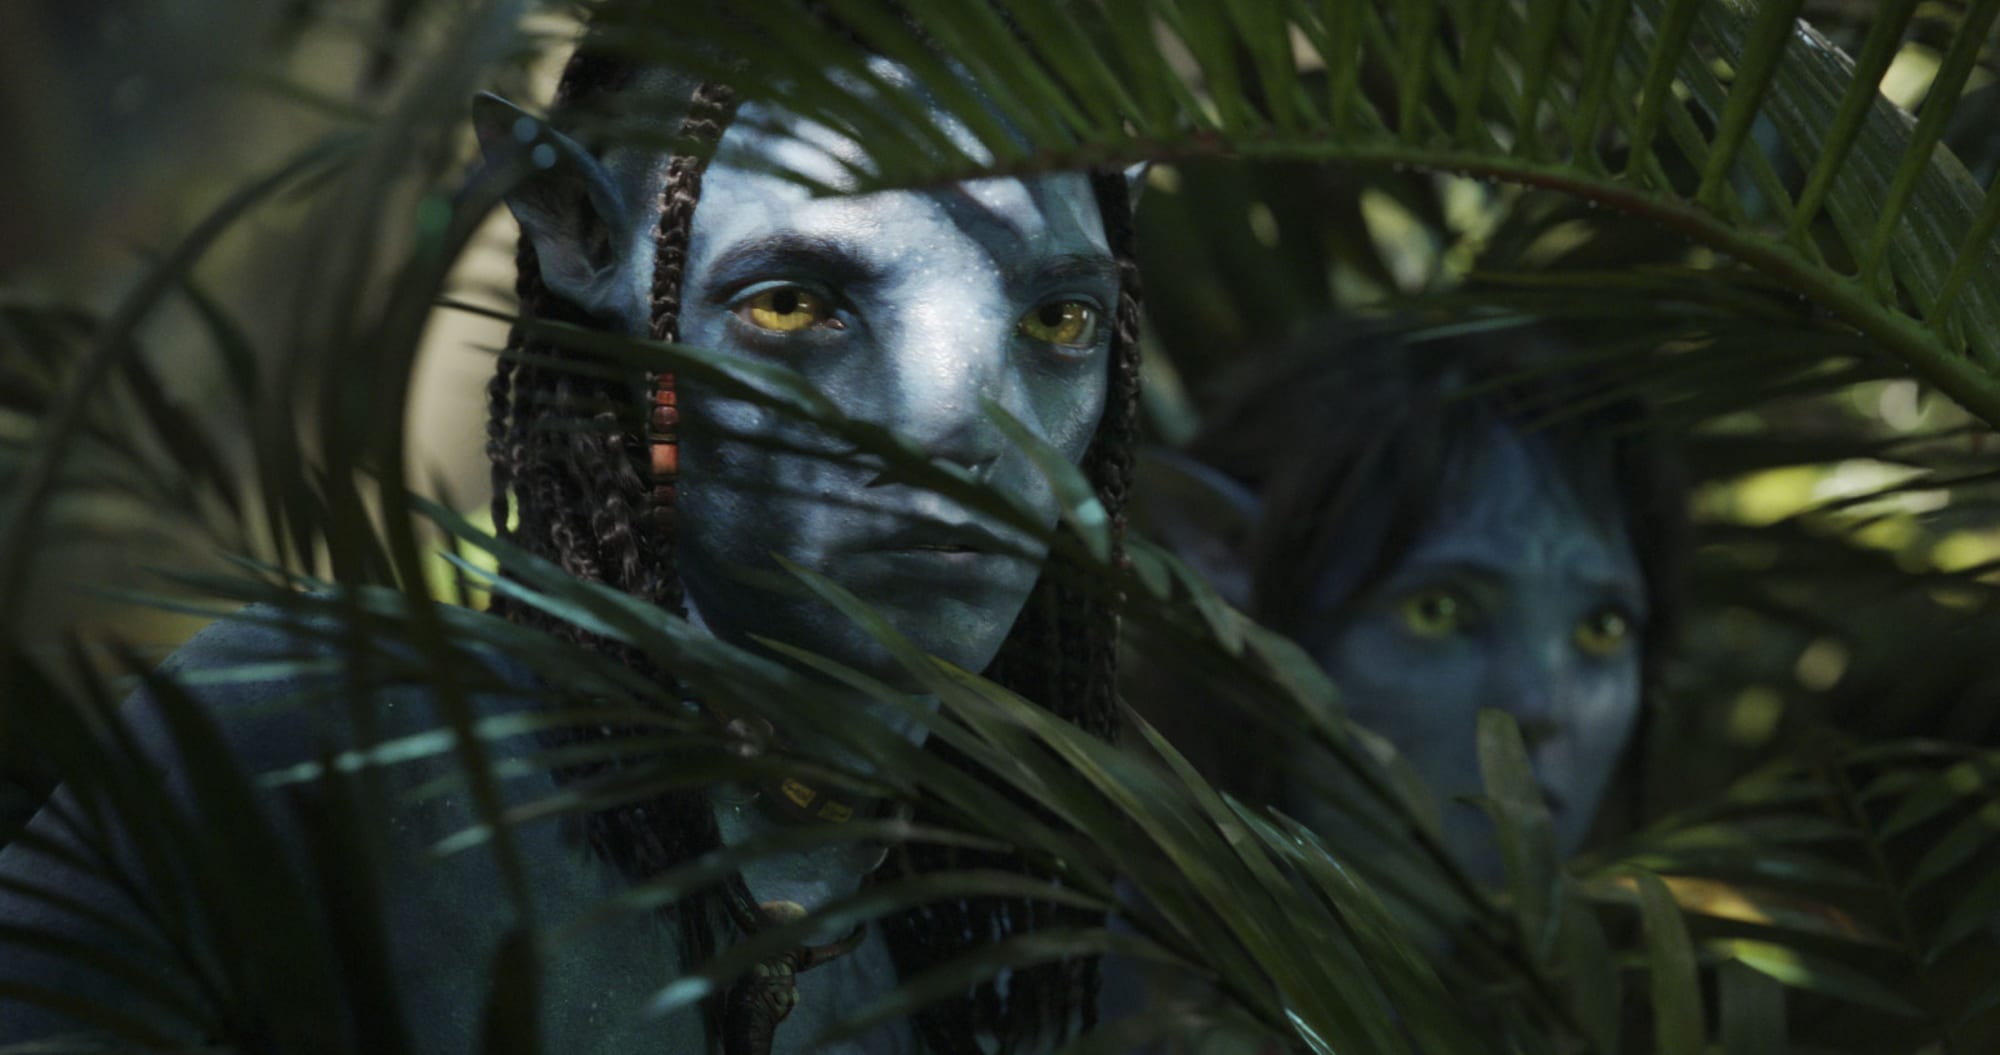 Where can you stream the first Avatar movie?